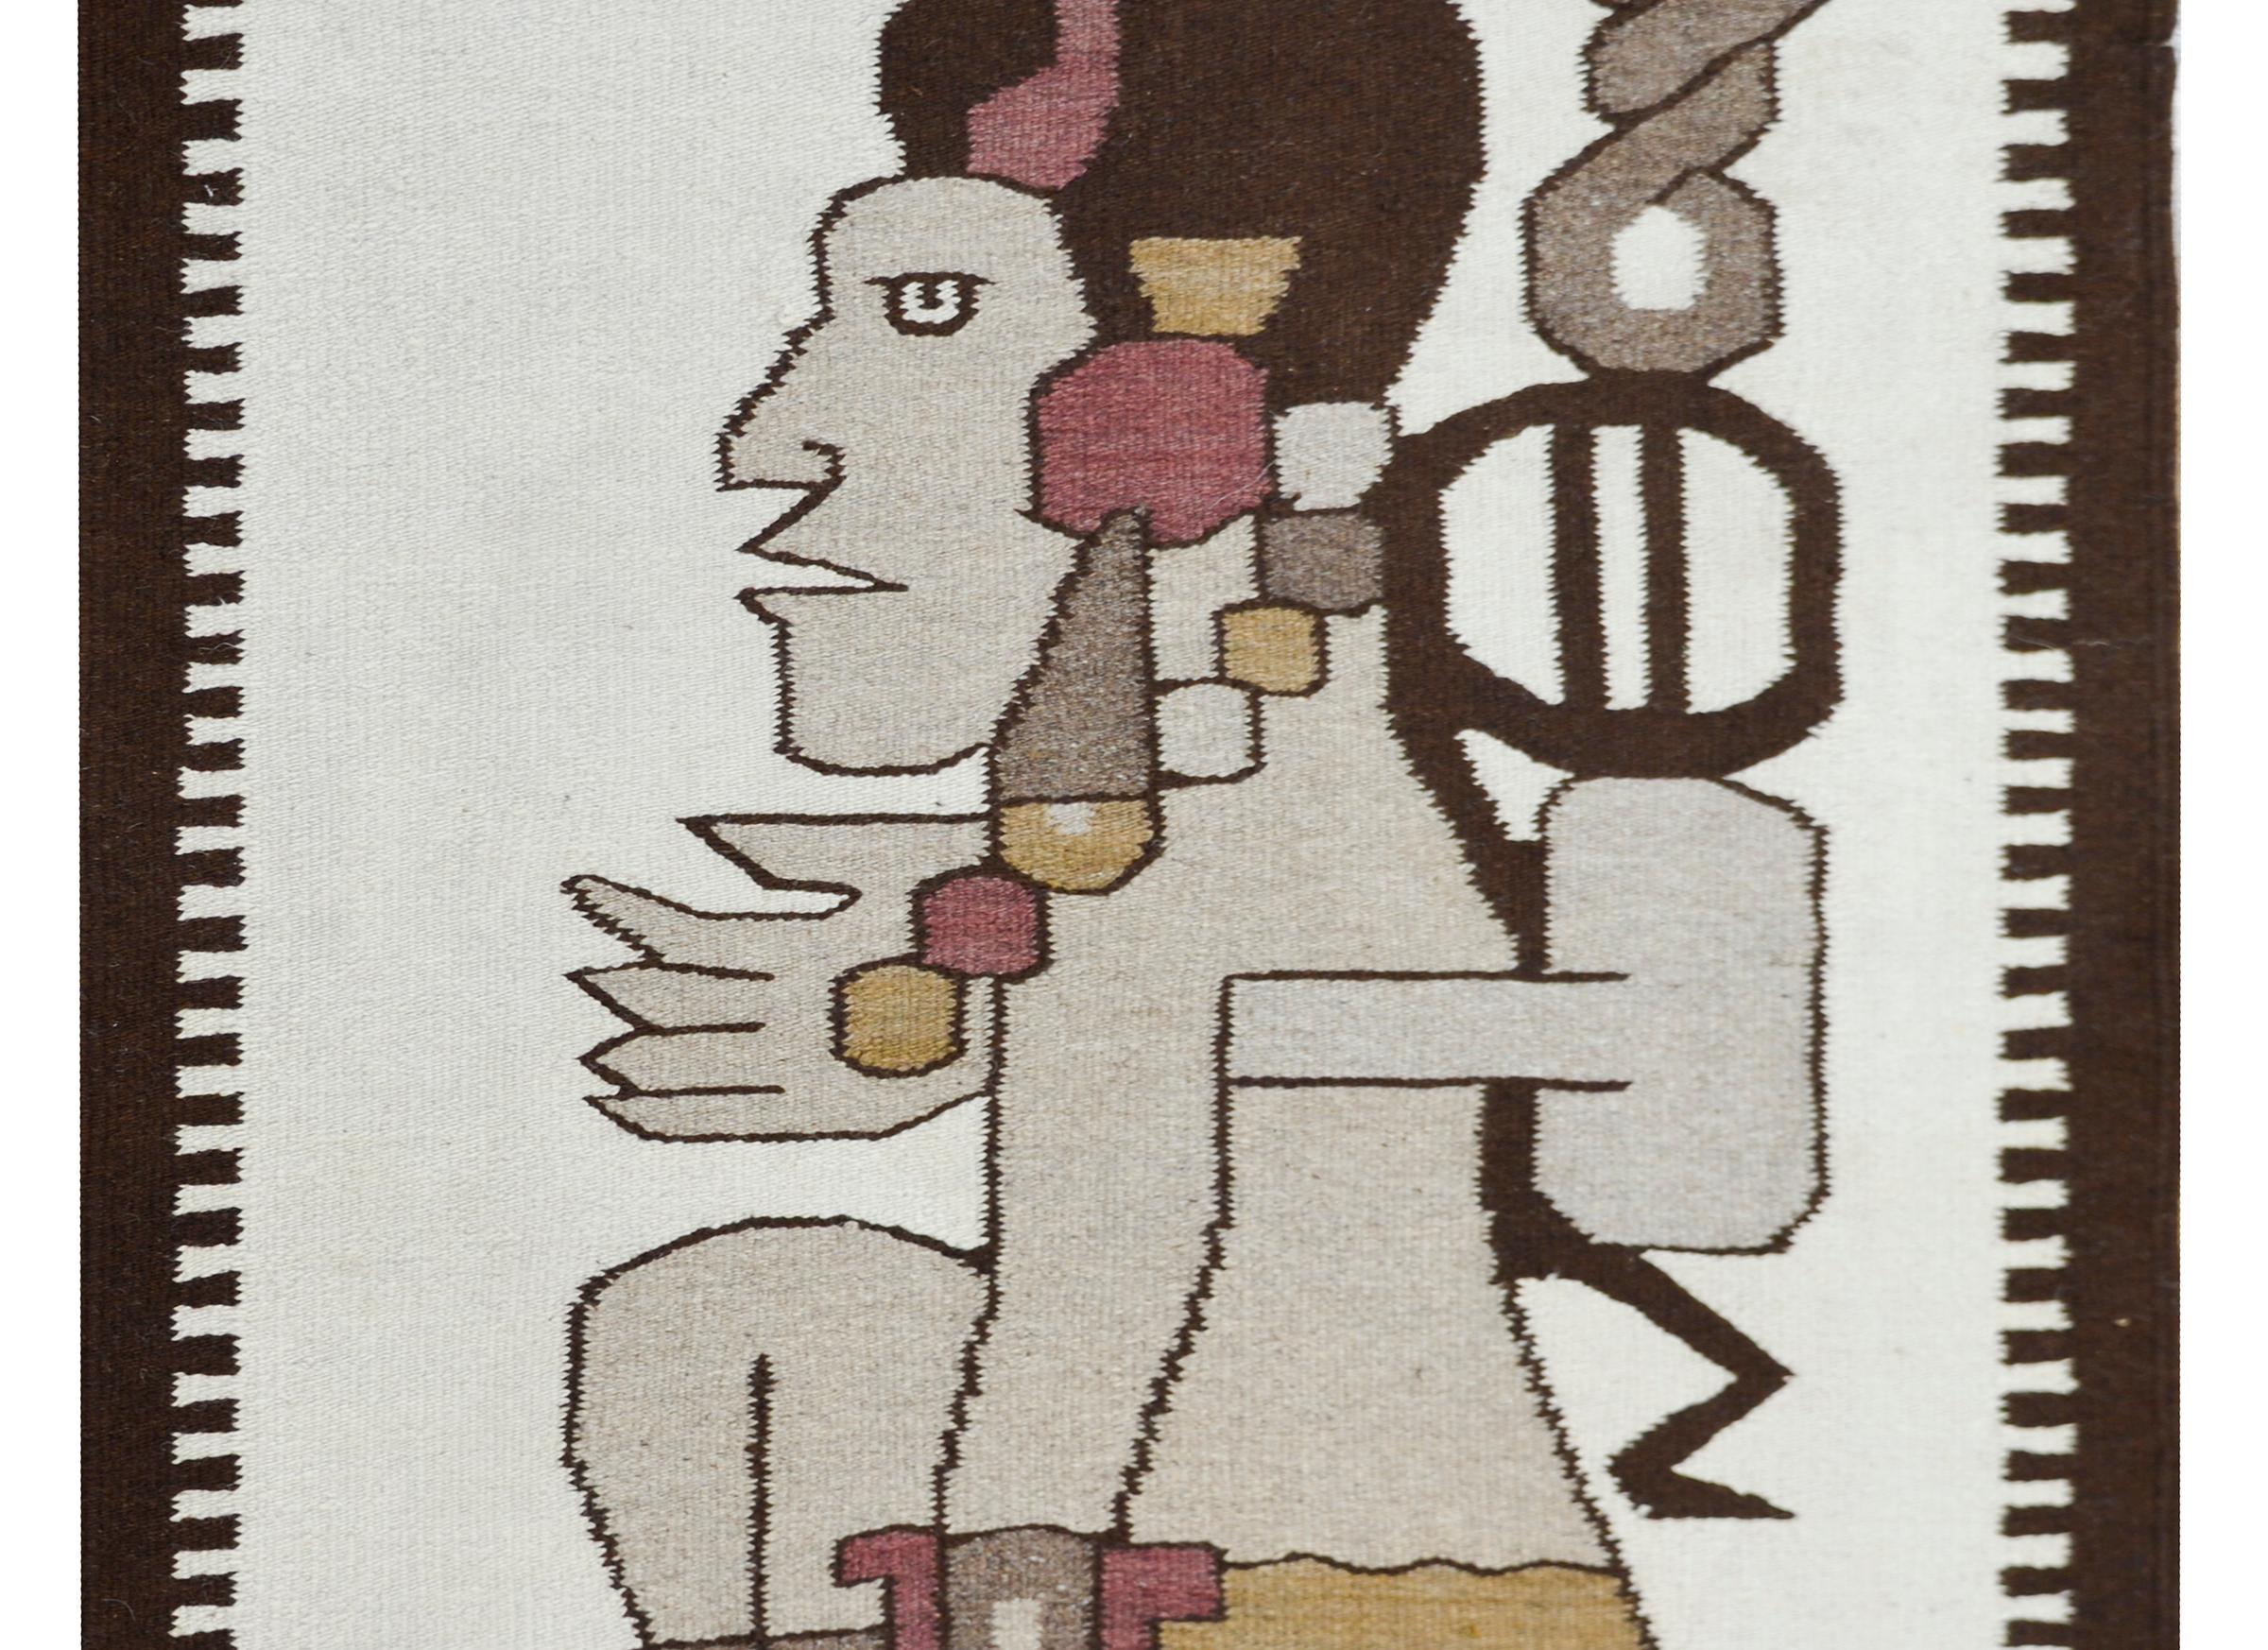 A wonderful late-20th century Mexican hand-woven wool rug with a large central Aztec figure in profile, and surrounded by a brown wool border with two stripes at each end.